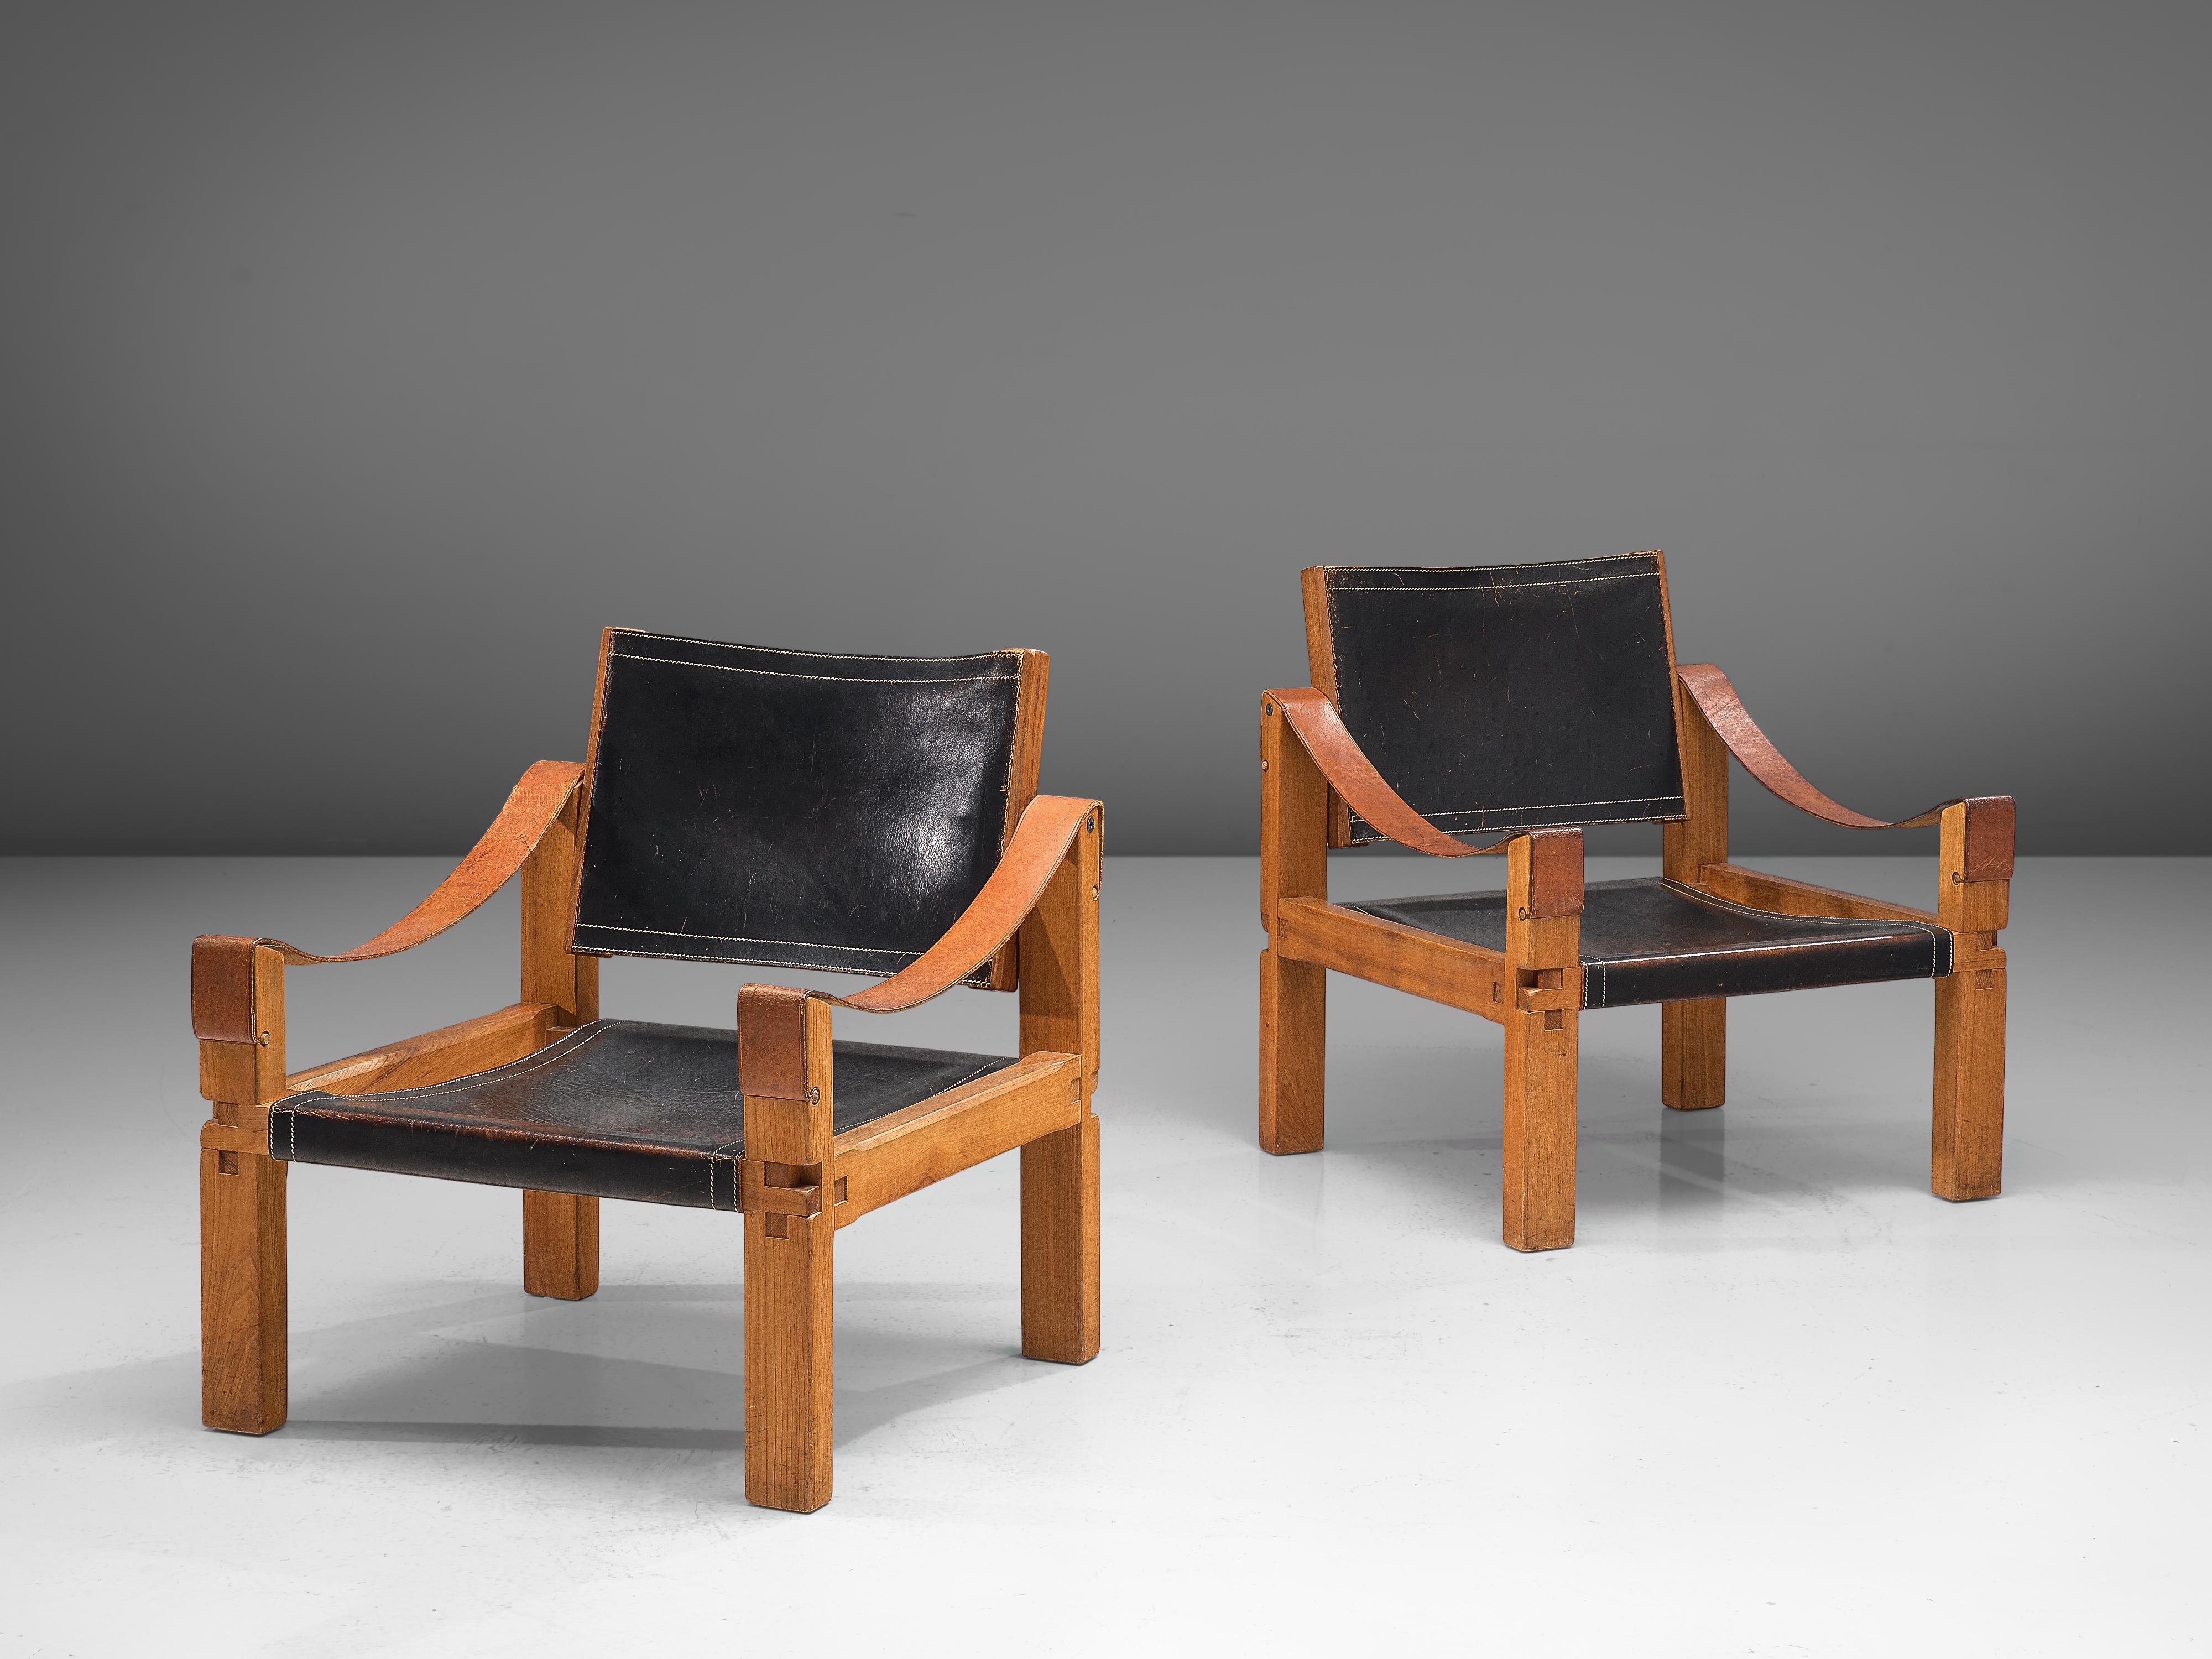 Pierre Chapo, pair of armchairs model 'S10X', elm, leather, France, circa 1964.

This design is an early edition, created according to the original craft methodology of Pierre Chapo. These comfortable armchairs in solid elmwood and black saddle